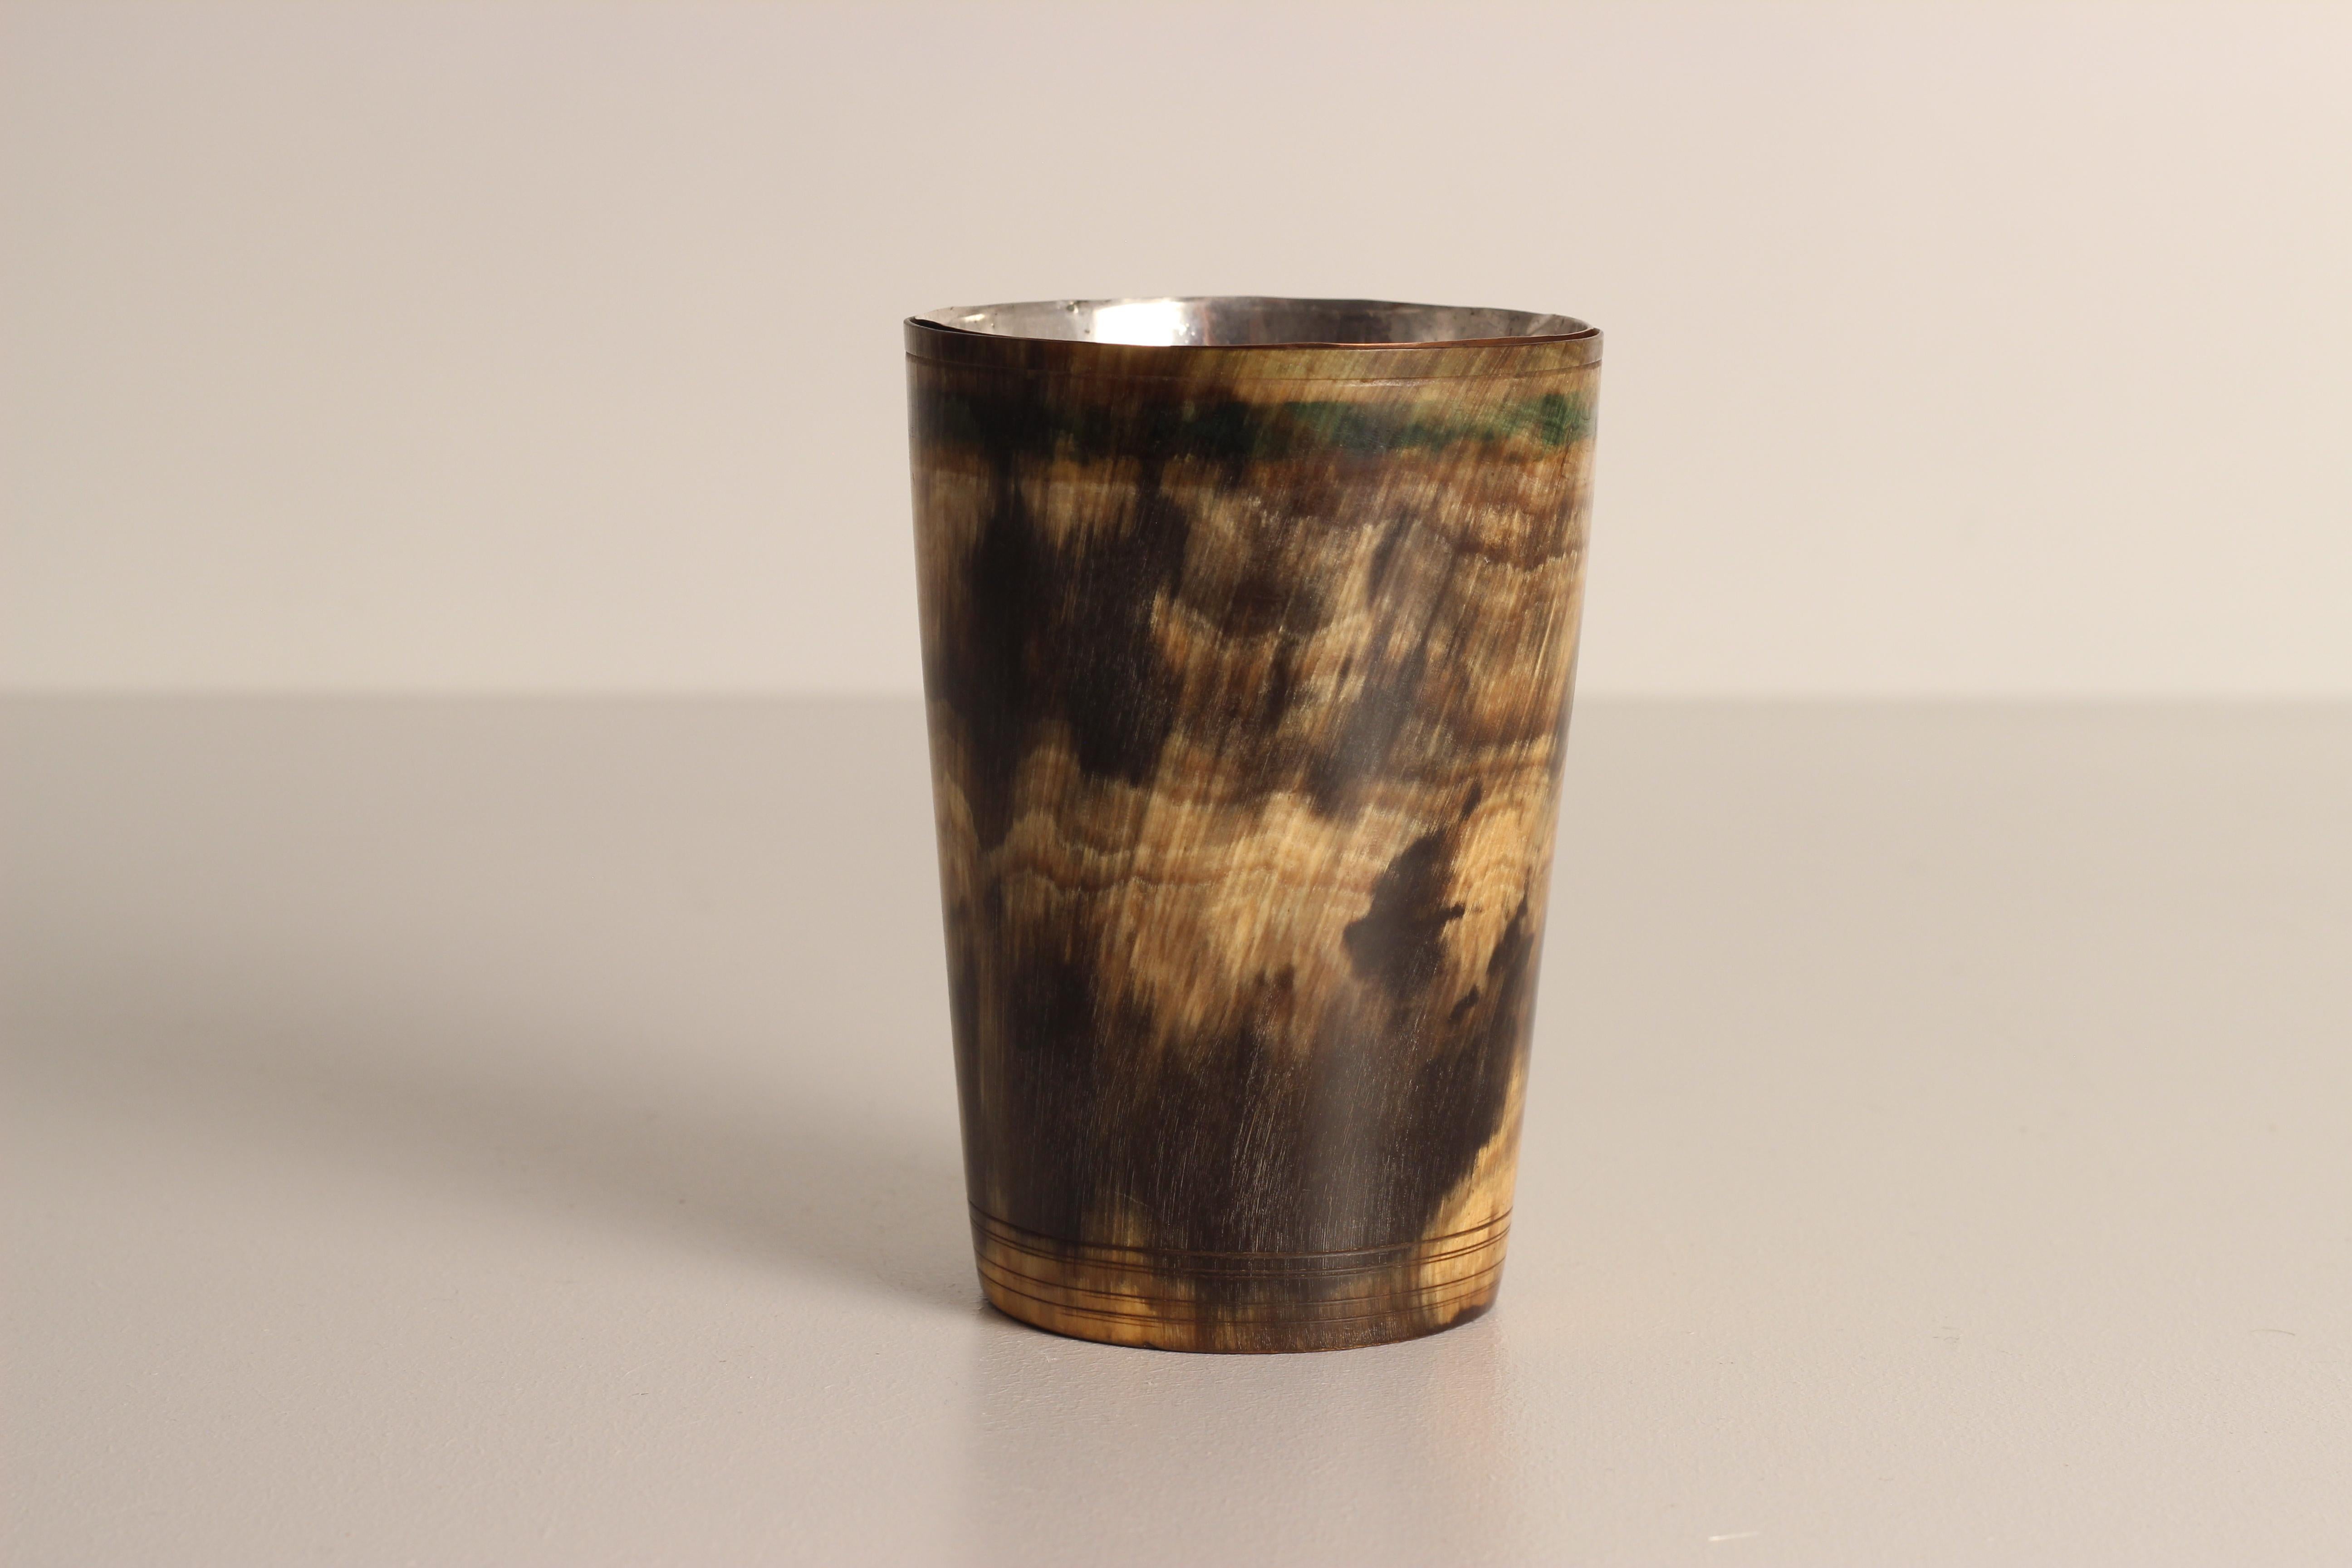 A beautiful decorative Horn Beaker or cup with wonderful decorative markings, benefitting from and interior copper and silver or tin lining interior sleeve with a glass base.

Measures: Height 12.4cm x diameter 8.5 cm 
Weight 0.20kg

We invite